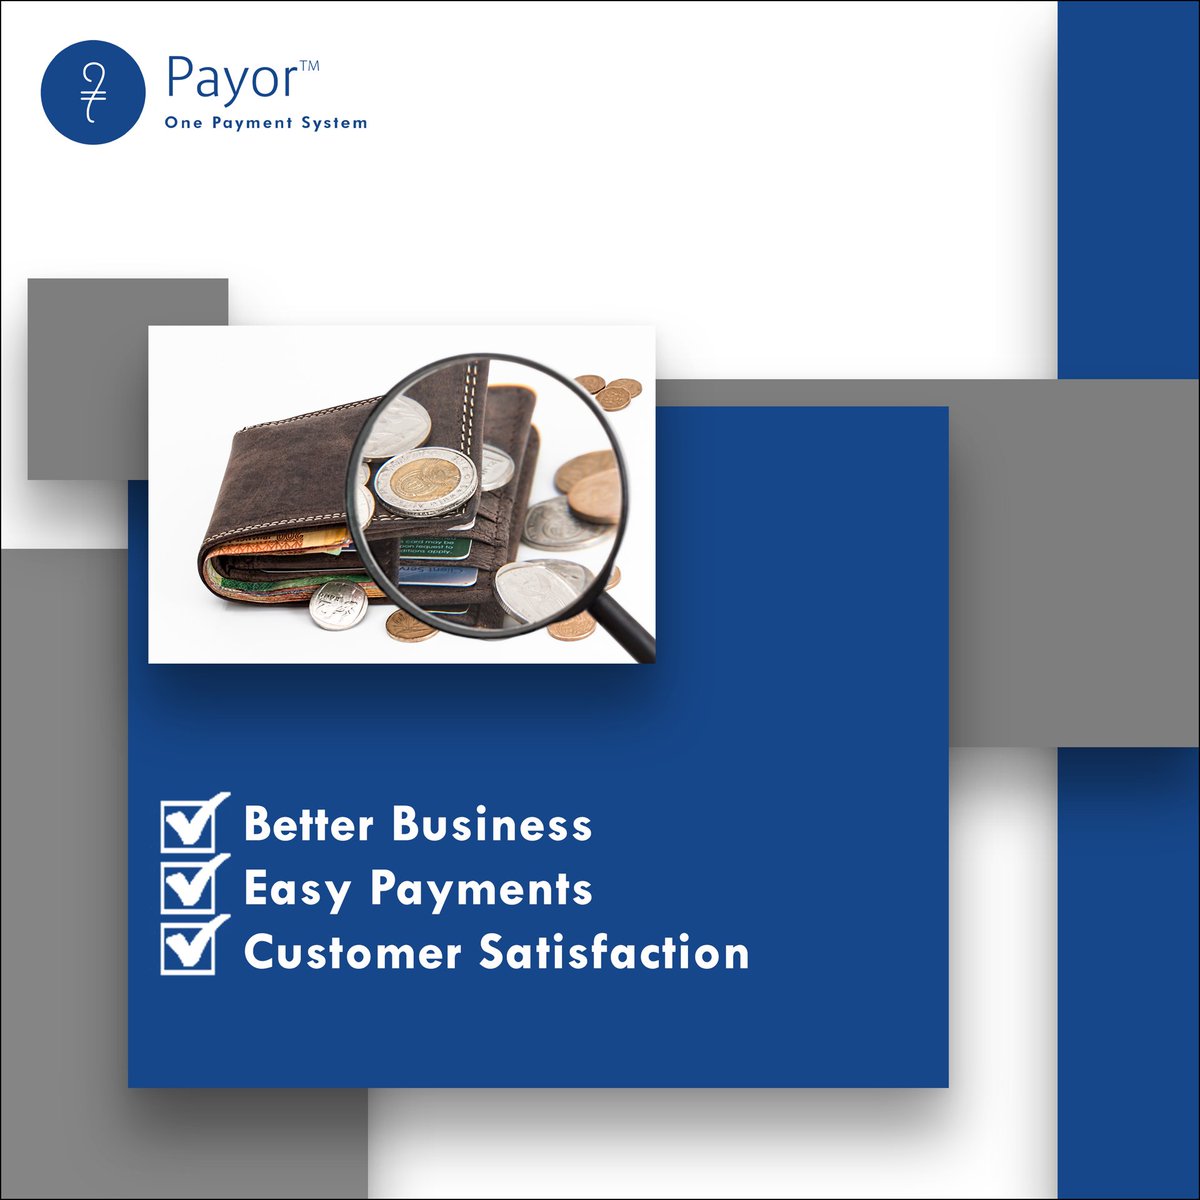 Do you lack the financial resources to begin your business? Payor will provide a credit boost to help you grow your business.
DMs can be used to make inquiries.

#Payor #businessinfluencer #blackwallstreet #wallstreet #businesstips #entrepreneurship101